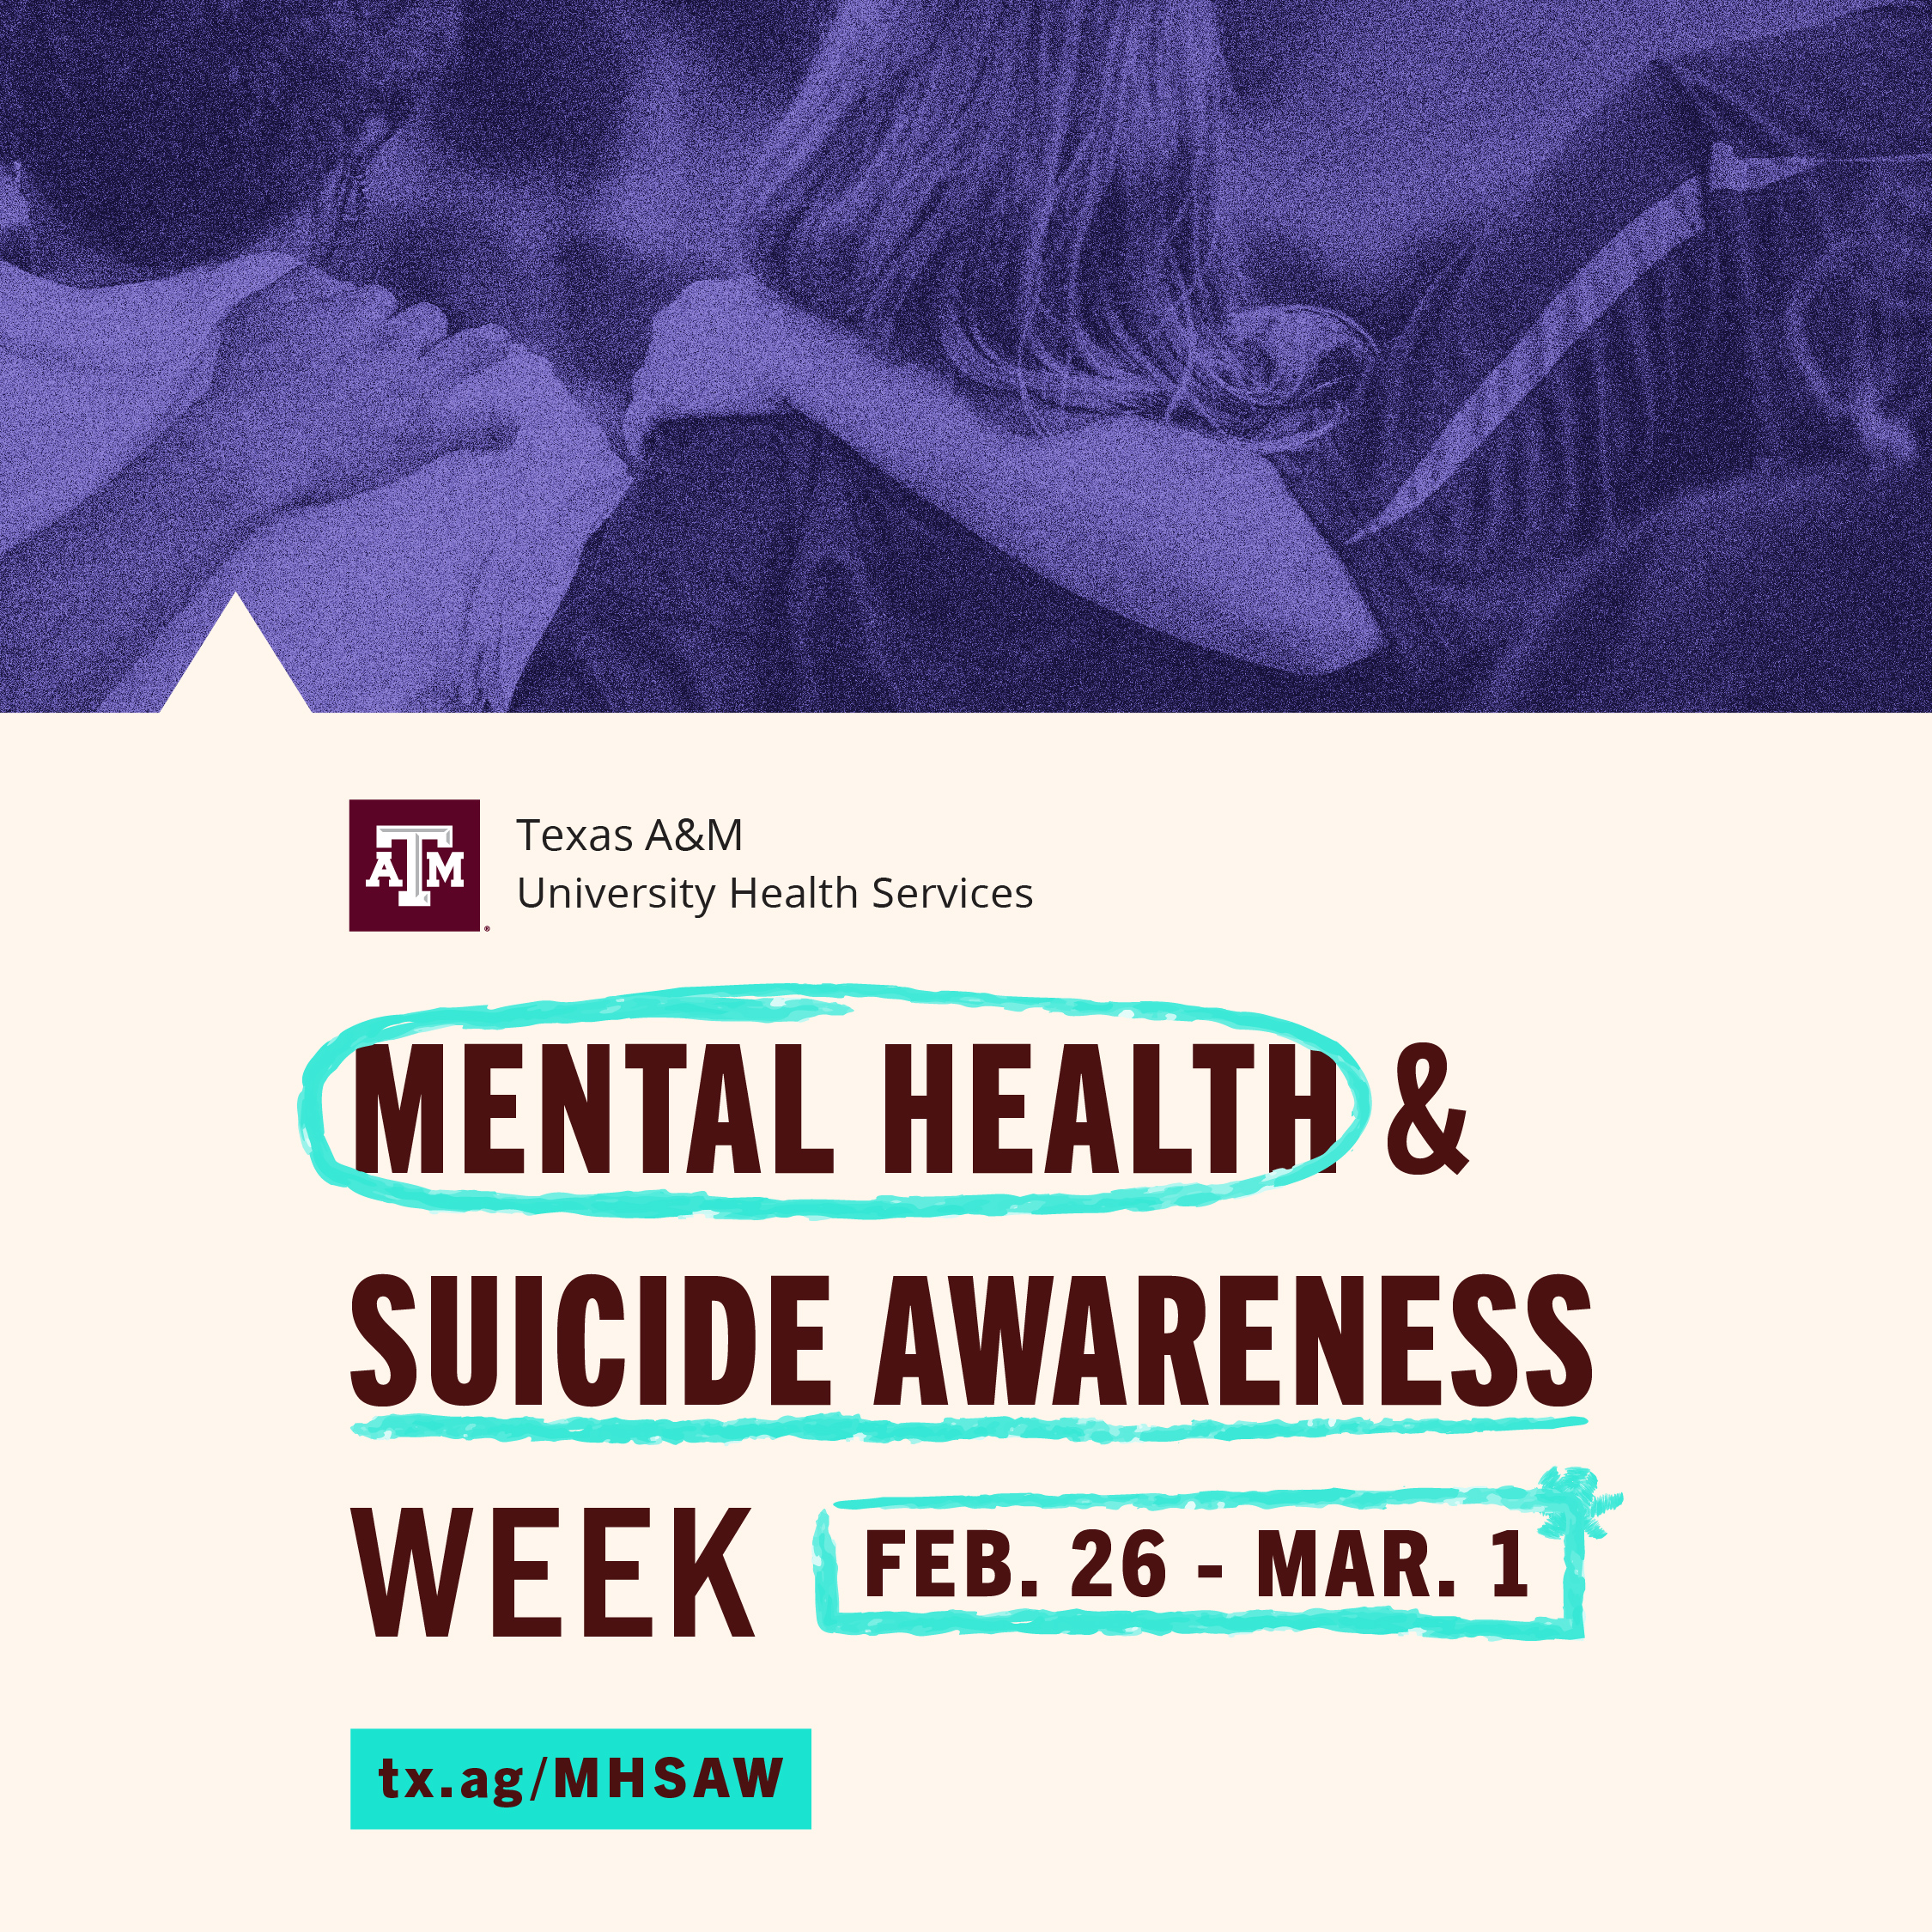 Mental Health & Suicide Awareness Week takes place February 26-March 1. Learn more at tx.ag/MHSAW. Presented by University Health Services.